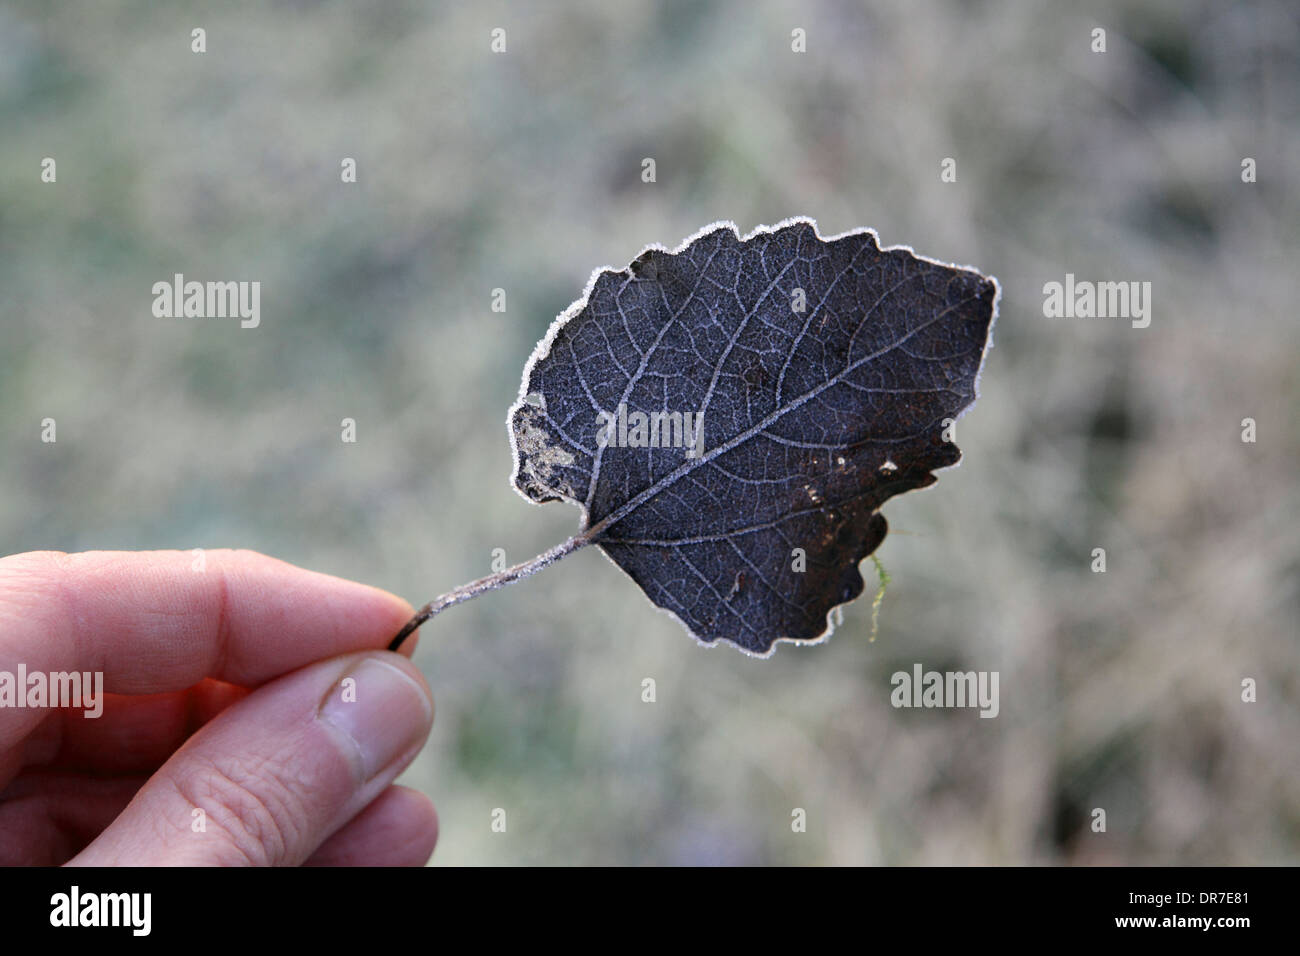 Fingers gently holding frozen leaf, wonder of nature & natural form, Winter frost, Suffolk, UK Stock Photo